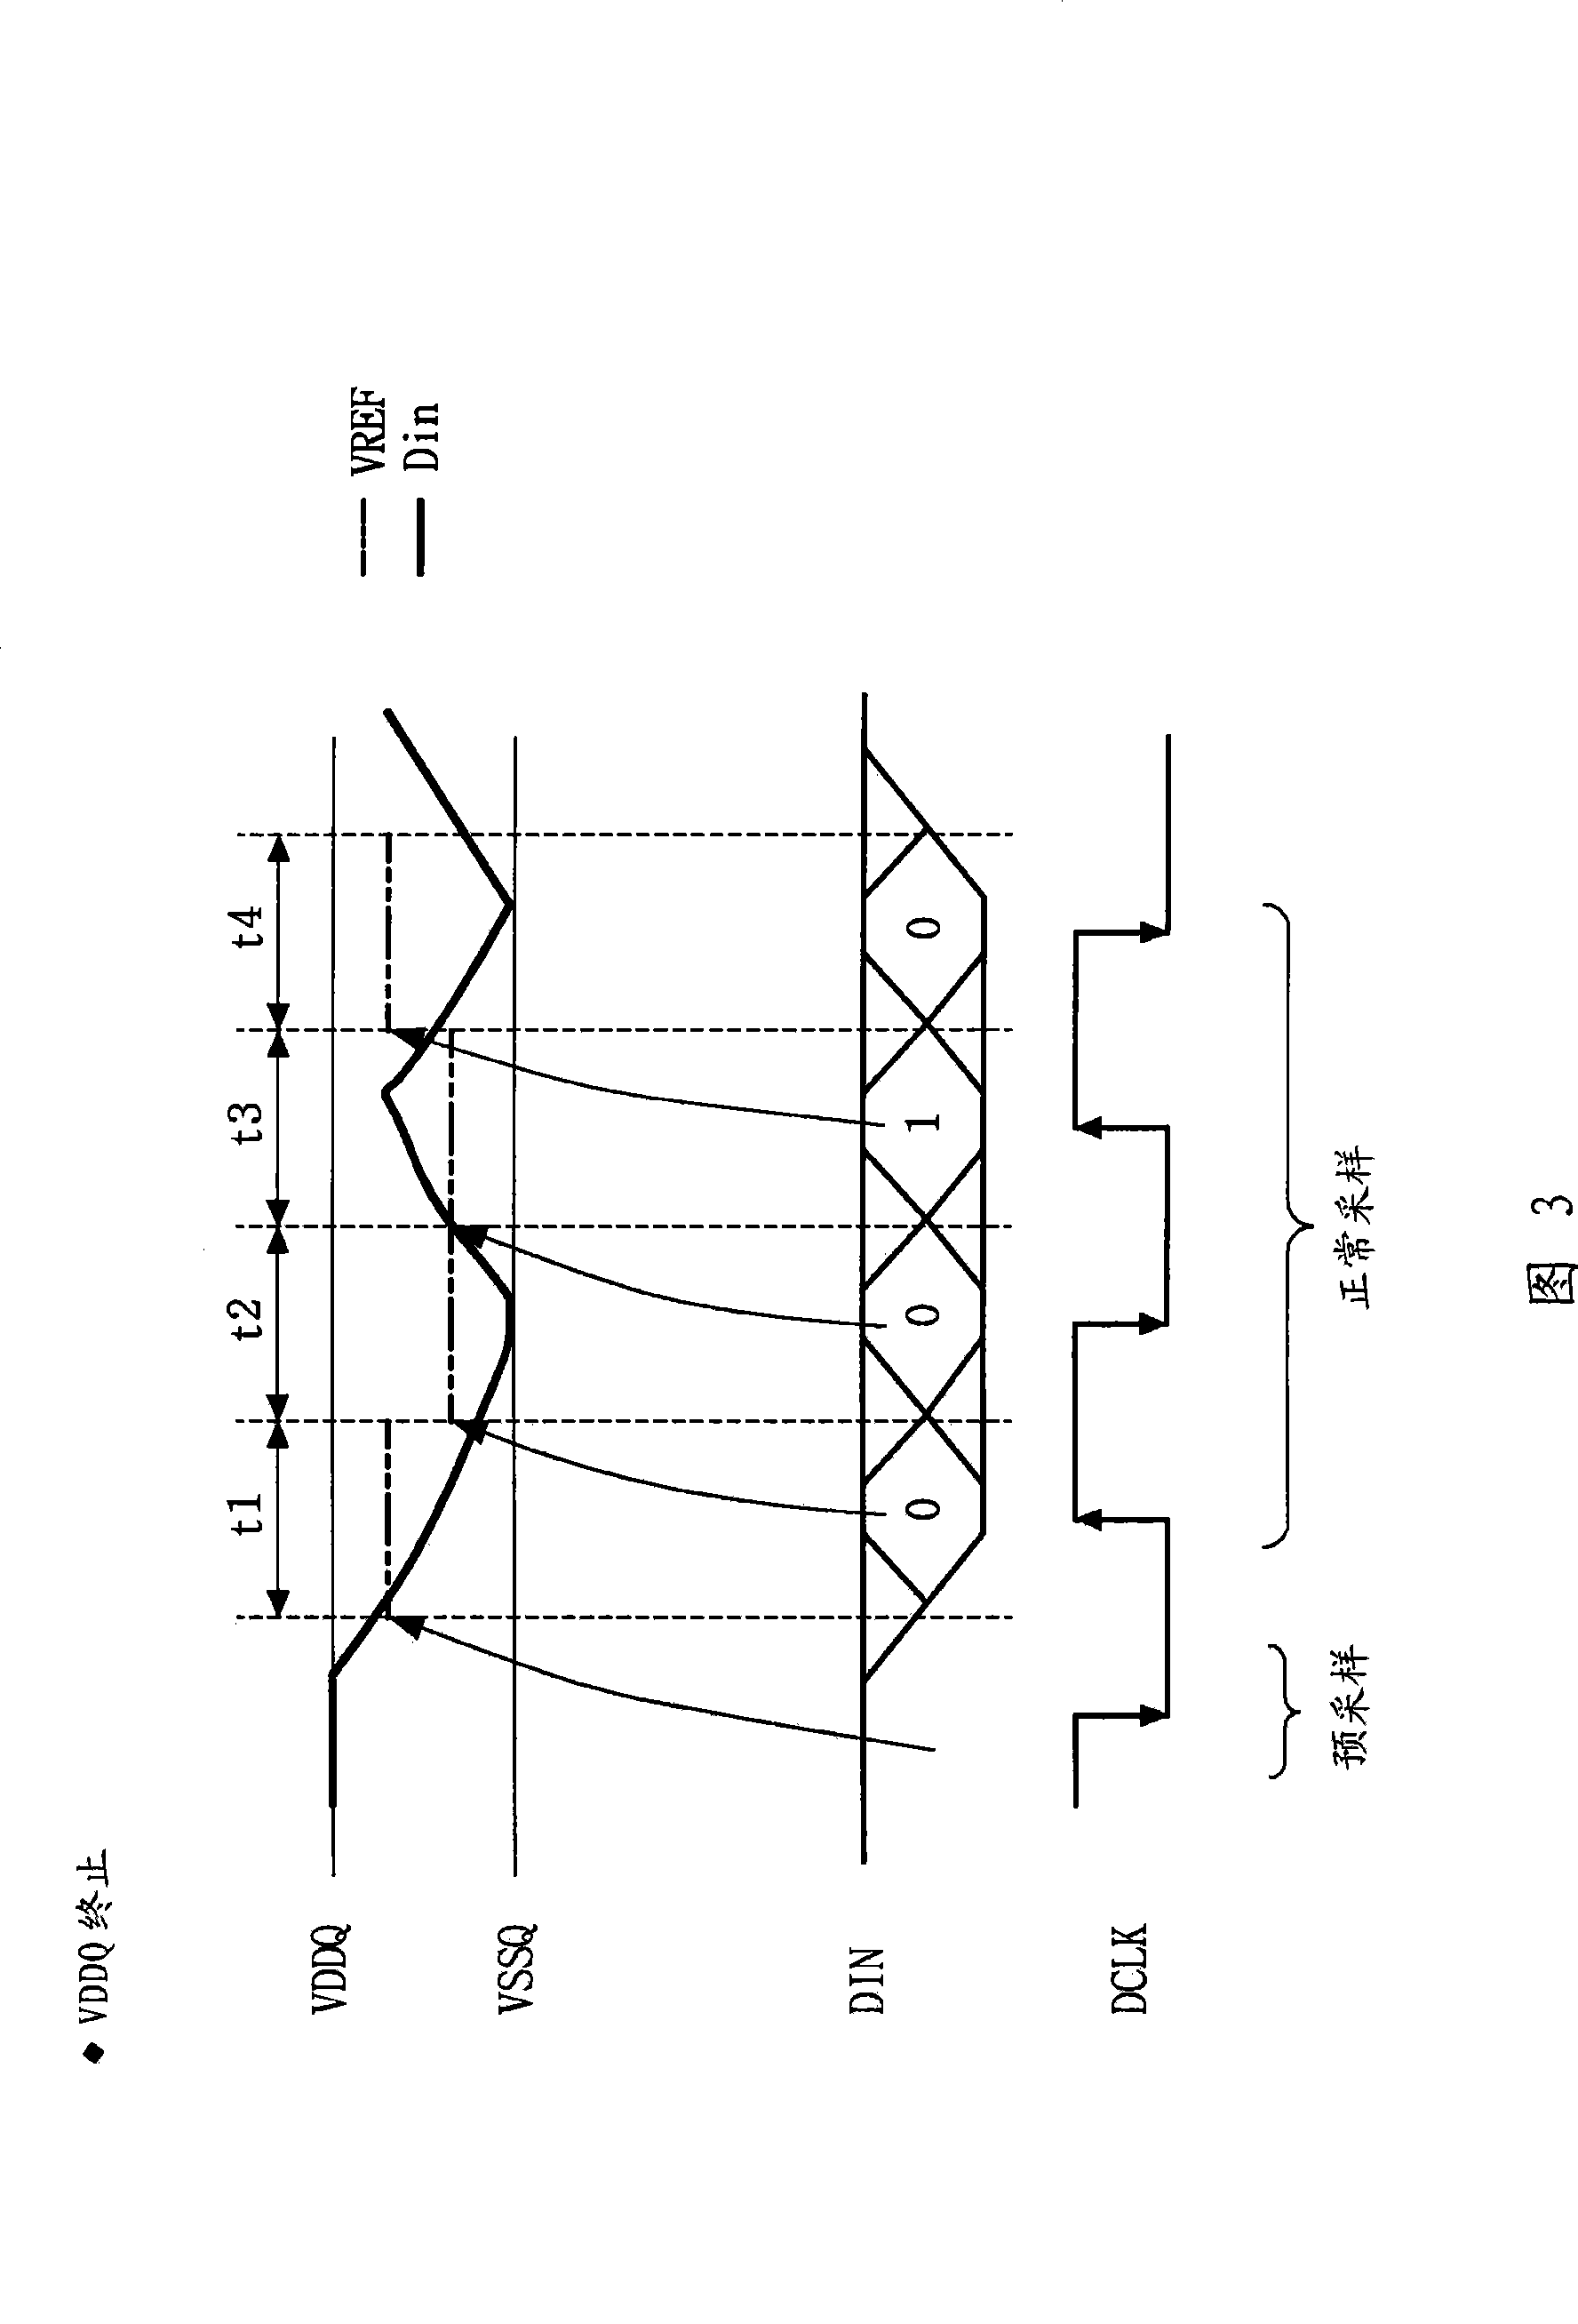 Decision feedback equalizer of semiconductor storage device and initialization method thereof